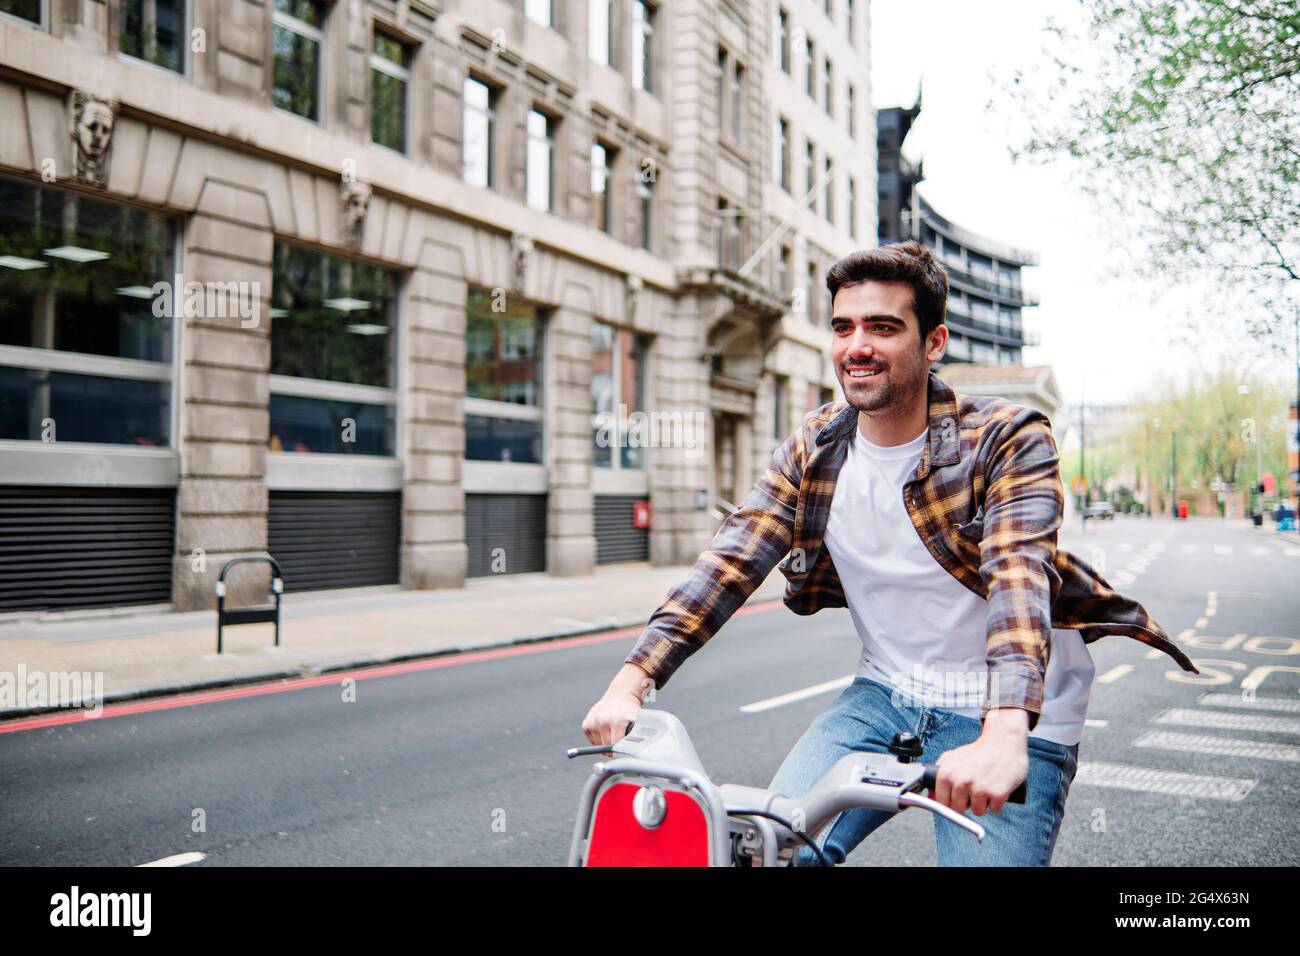 Smiling man wearing plaid shirt cycling on road in city Stock Photo